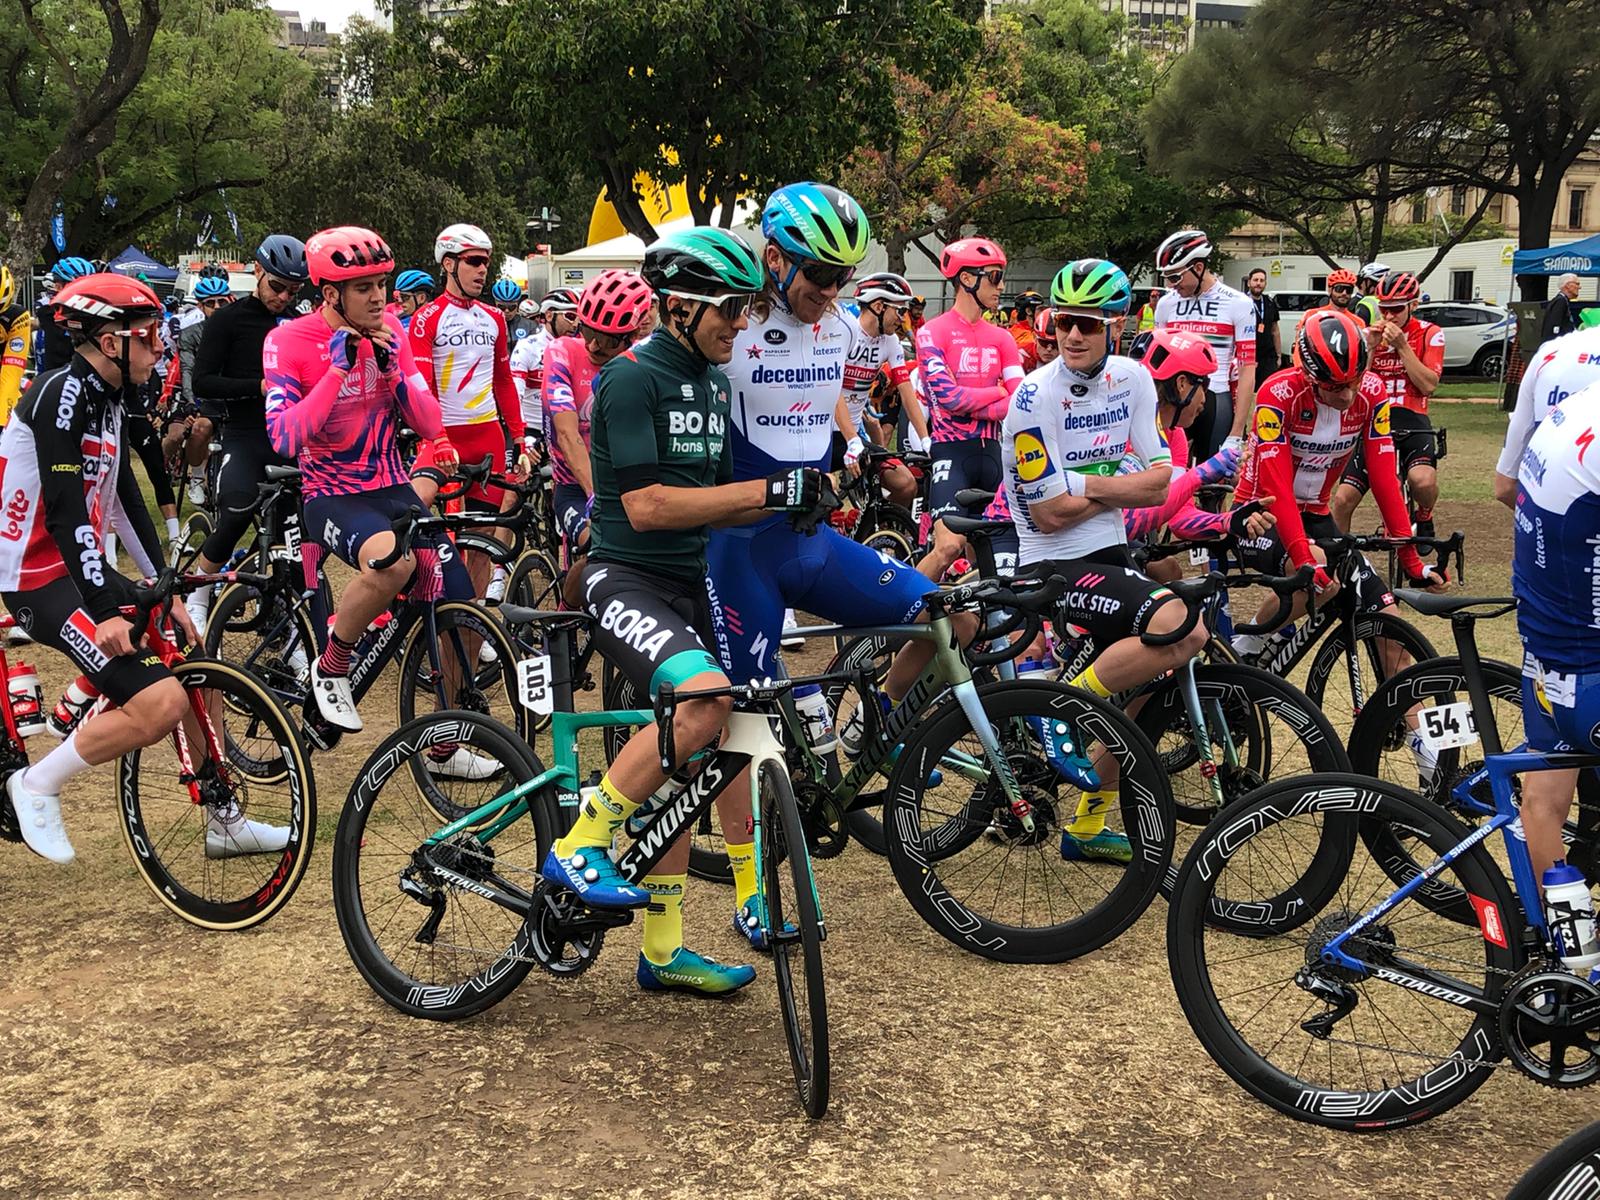 The men's Tour Down Under is about to start